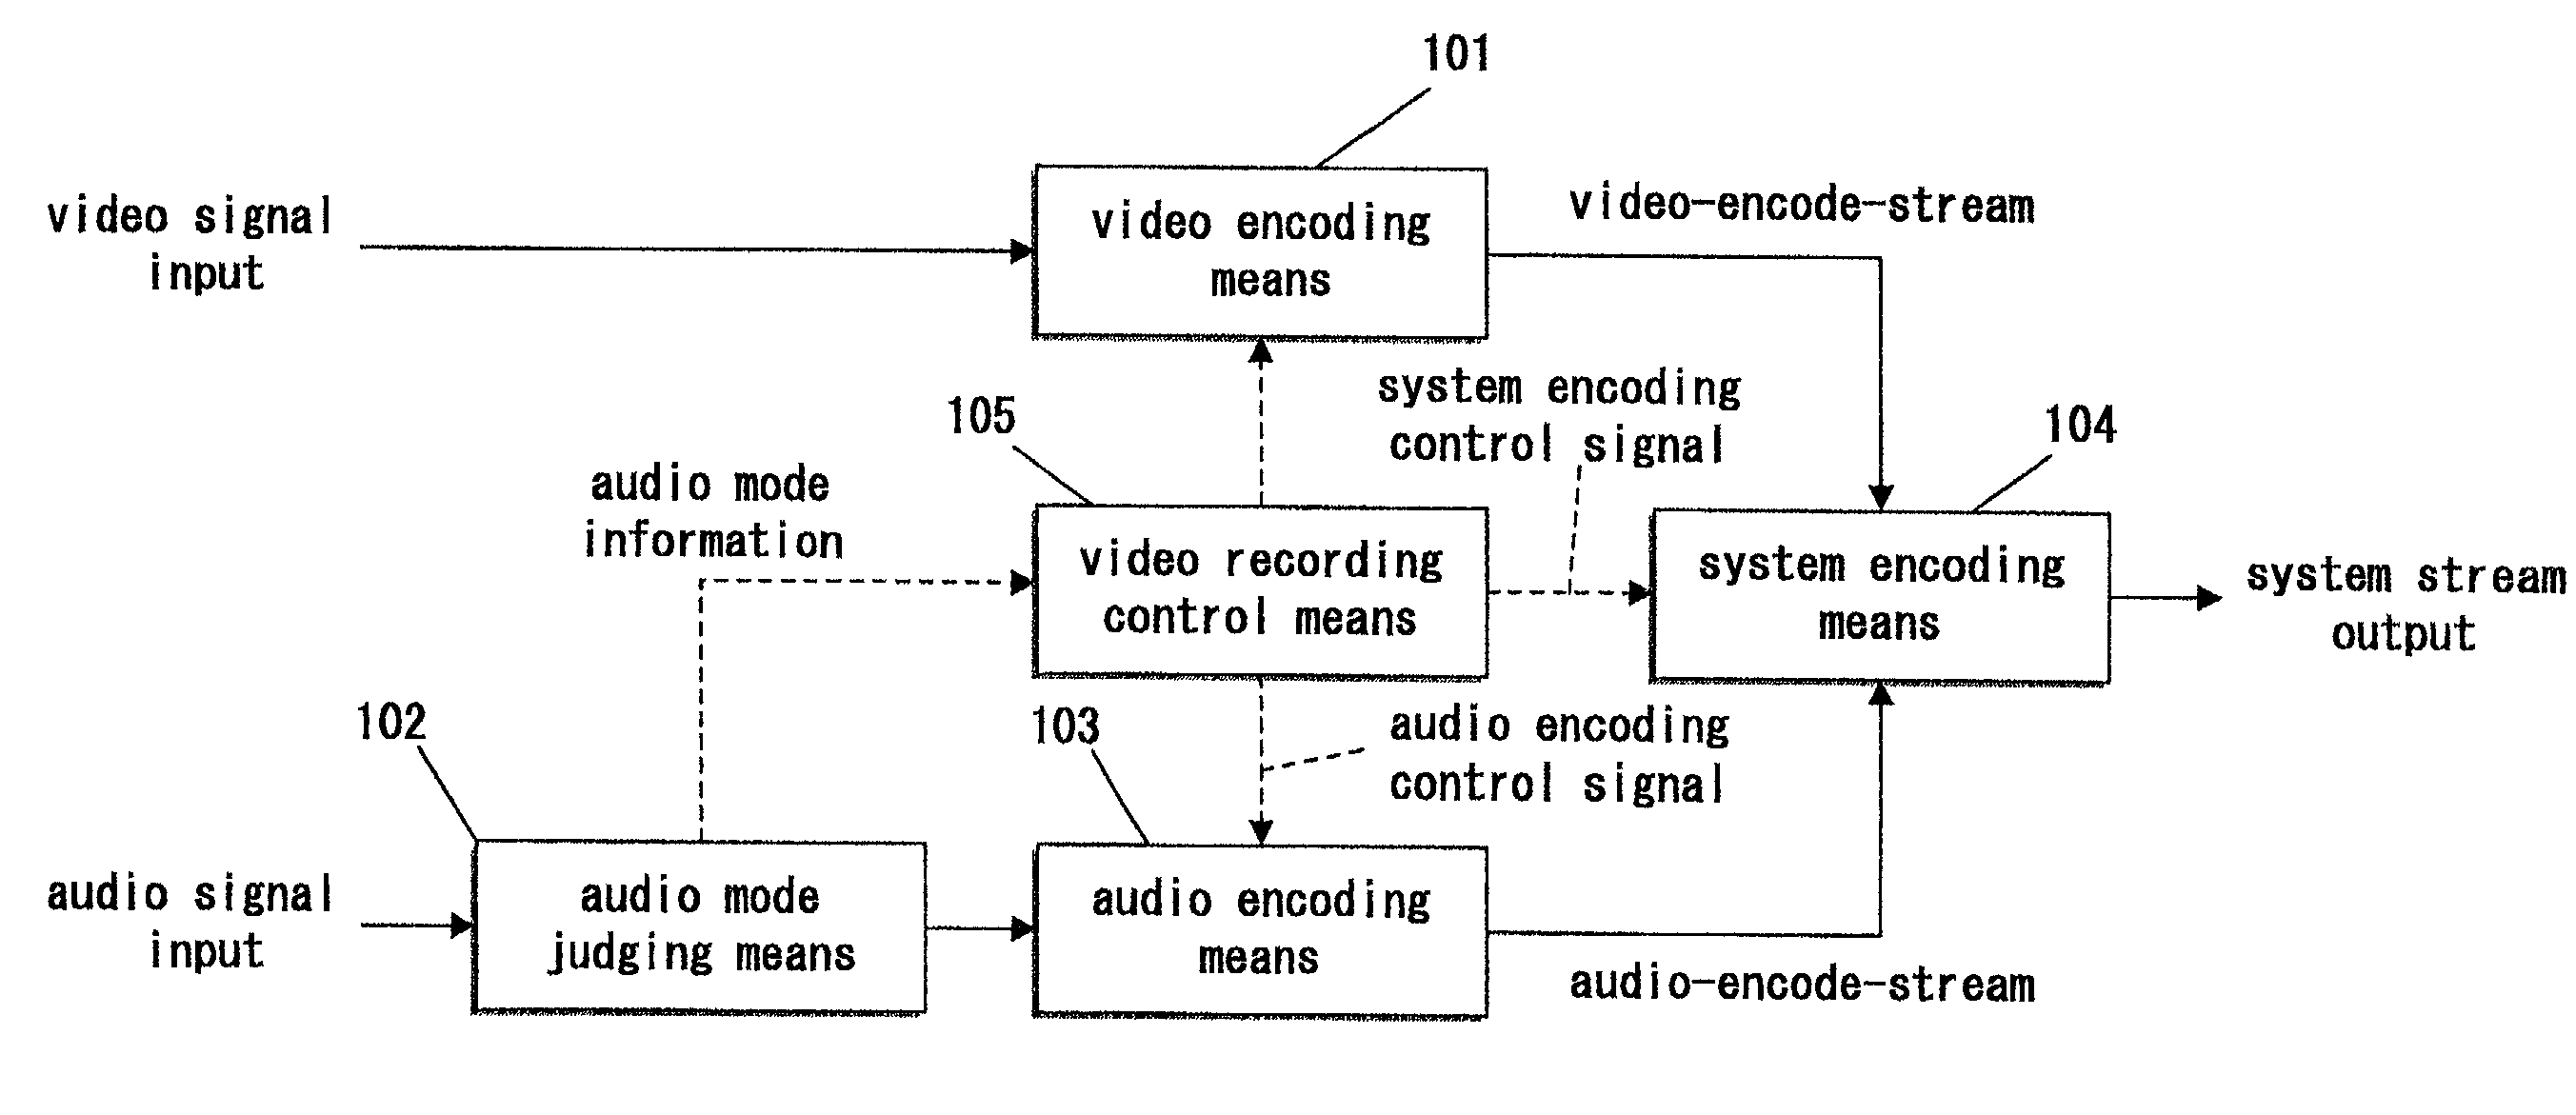 Automatic level control for changing audio mode of digital video recording apparatus